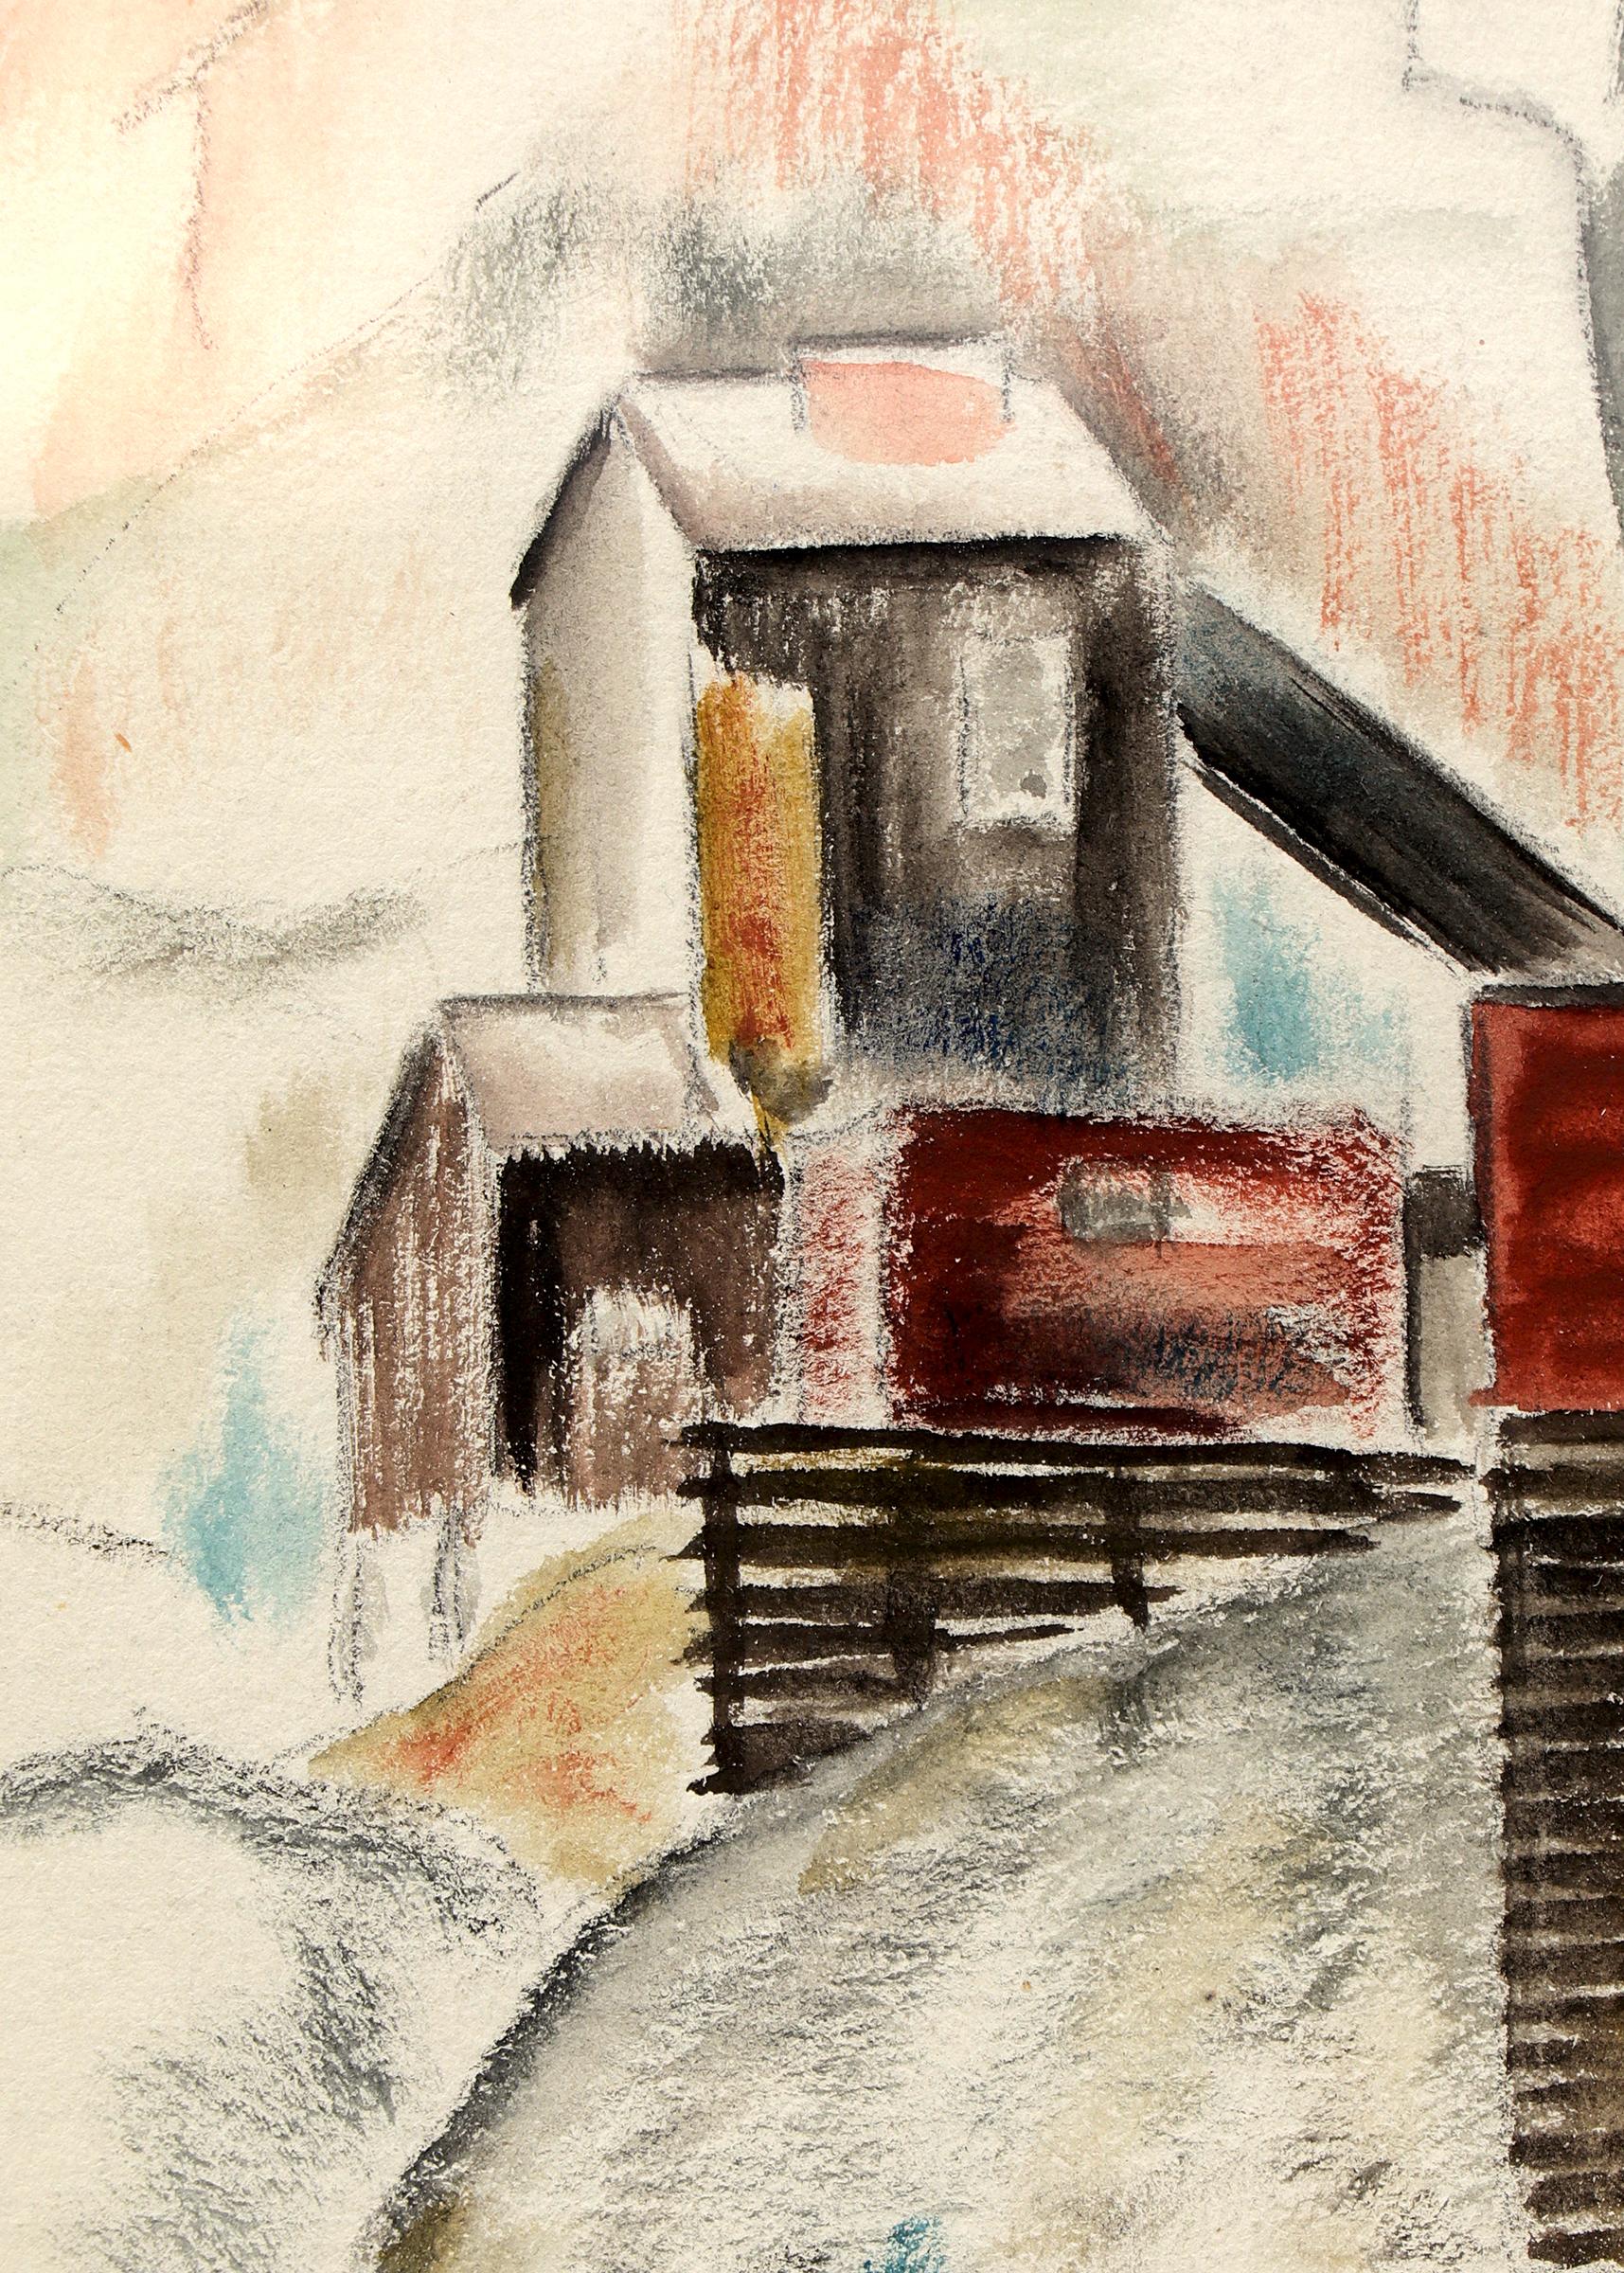 Graphite and watercolor painting of a Colorado mining landscape in red, yellow and brown by 20th Century artist, Louise Emerson Ronnebeck. Presented in a custom frame, outer dimensions measure 21 ⅛ x 17 ⅞ x ¾ inches. Image sight size is 11 x 8